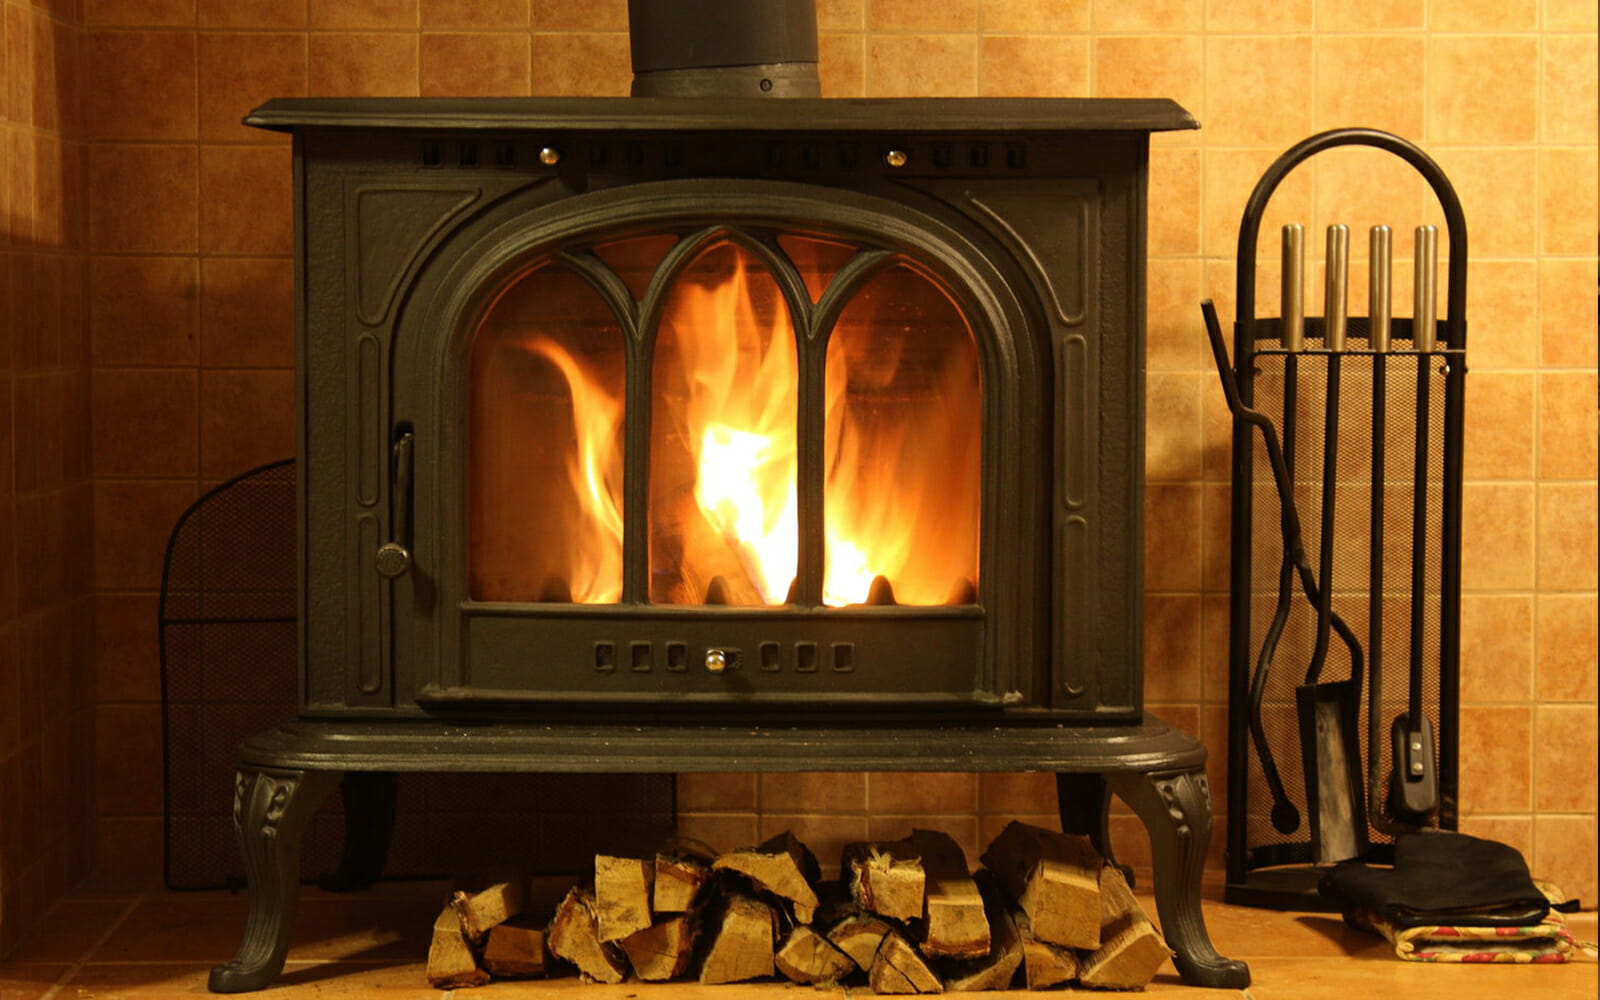 An image of a wood burning stove